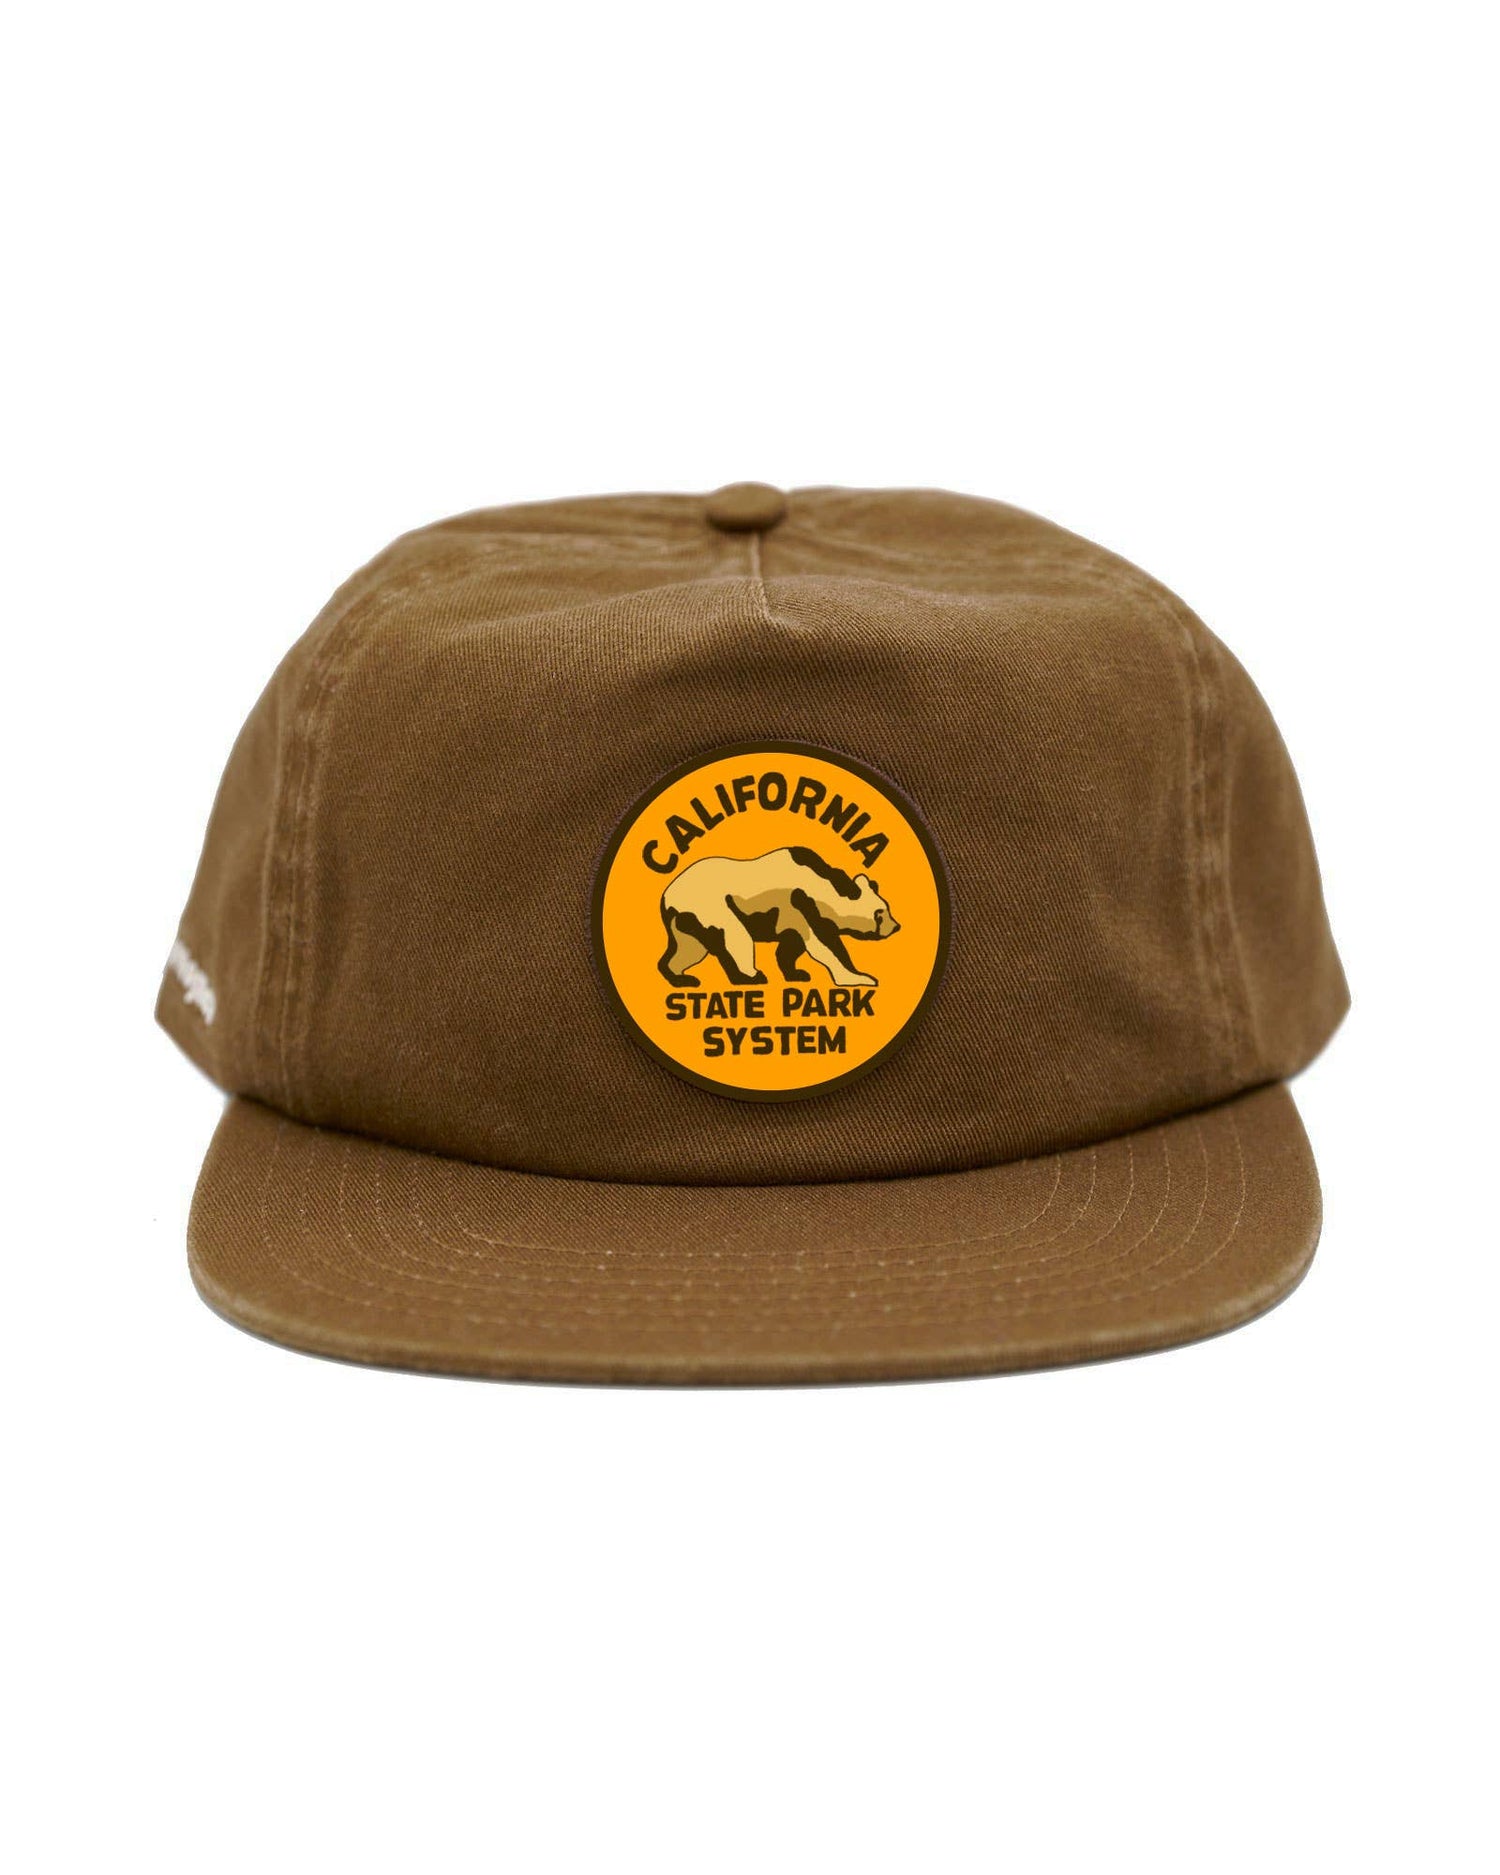 Brown California State Parks System Dad Hat with bear badge